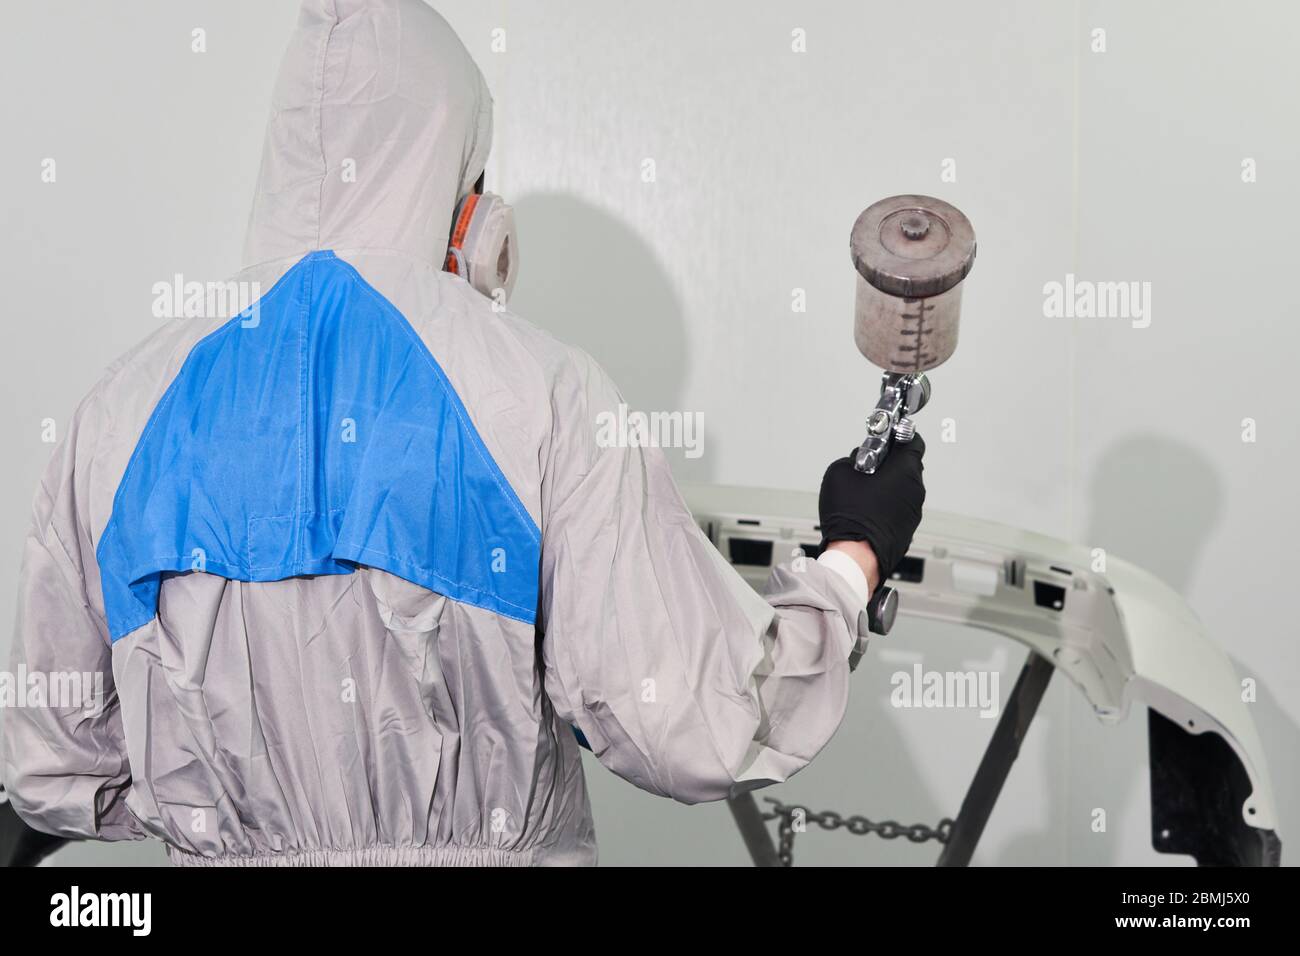 Mechanic painting bumper of a car with sprayer in painting booth in repair auto service Stock Photo